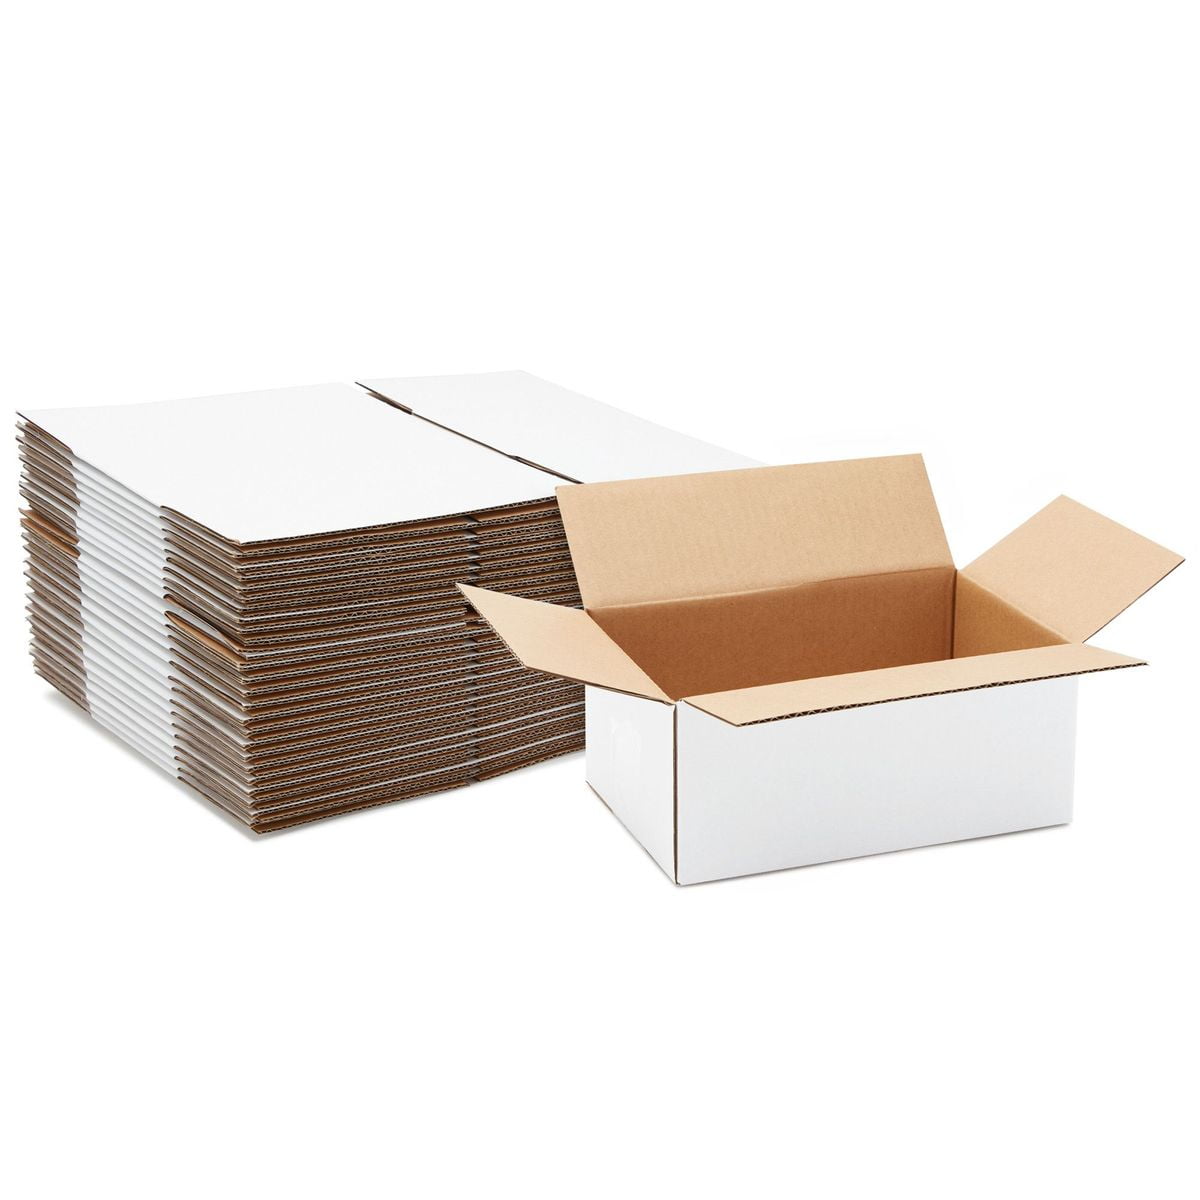 Small White Corrugated Cardboard Boxes for Mailing 25 Pack 8x6x4 Shipping Box